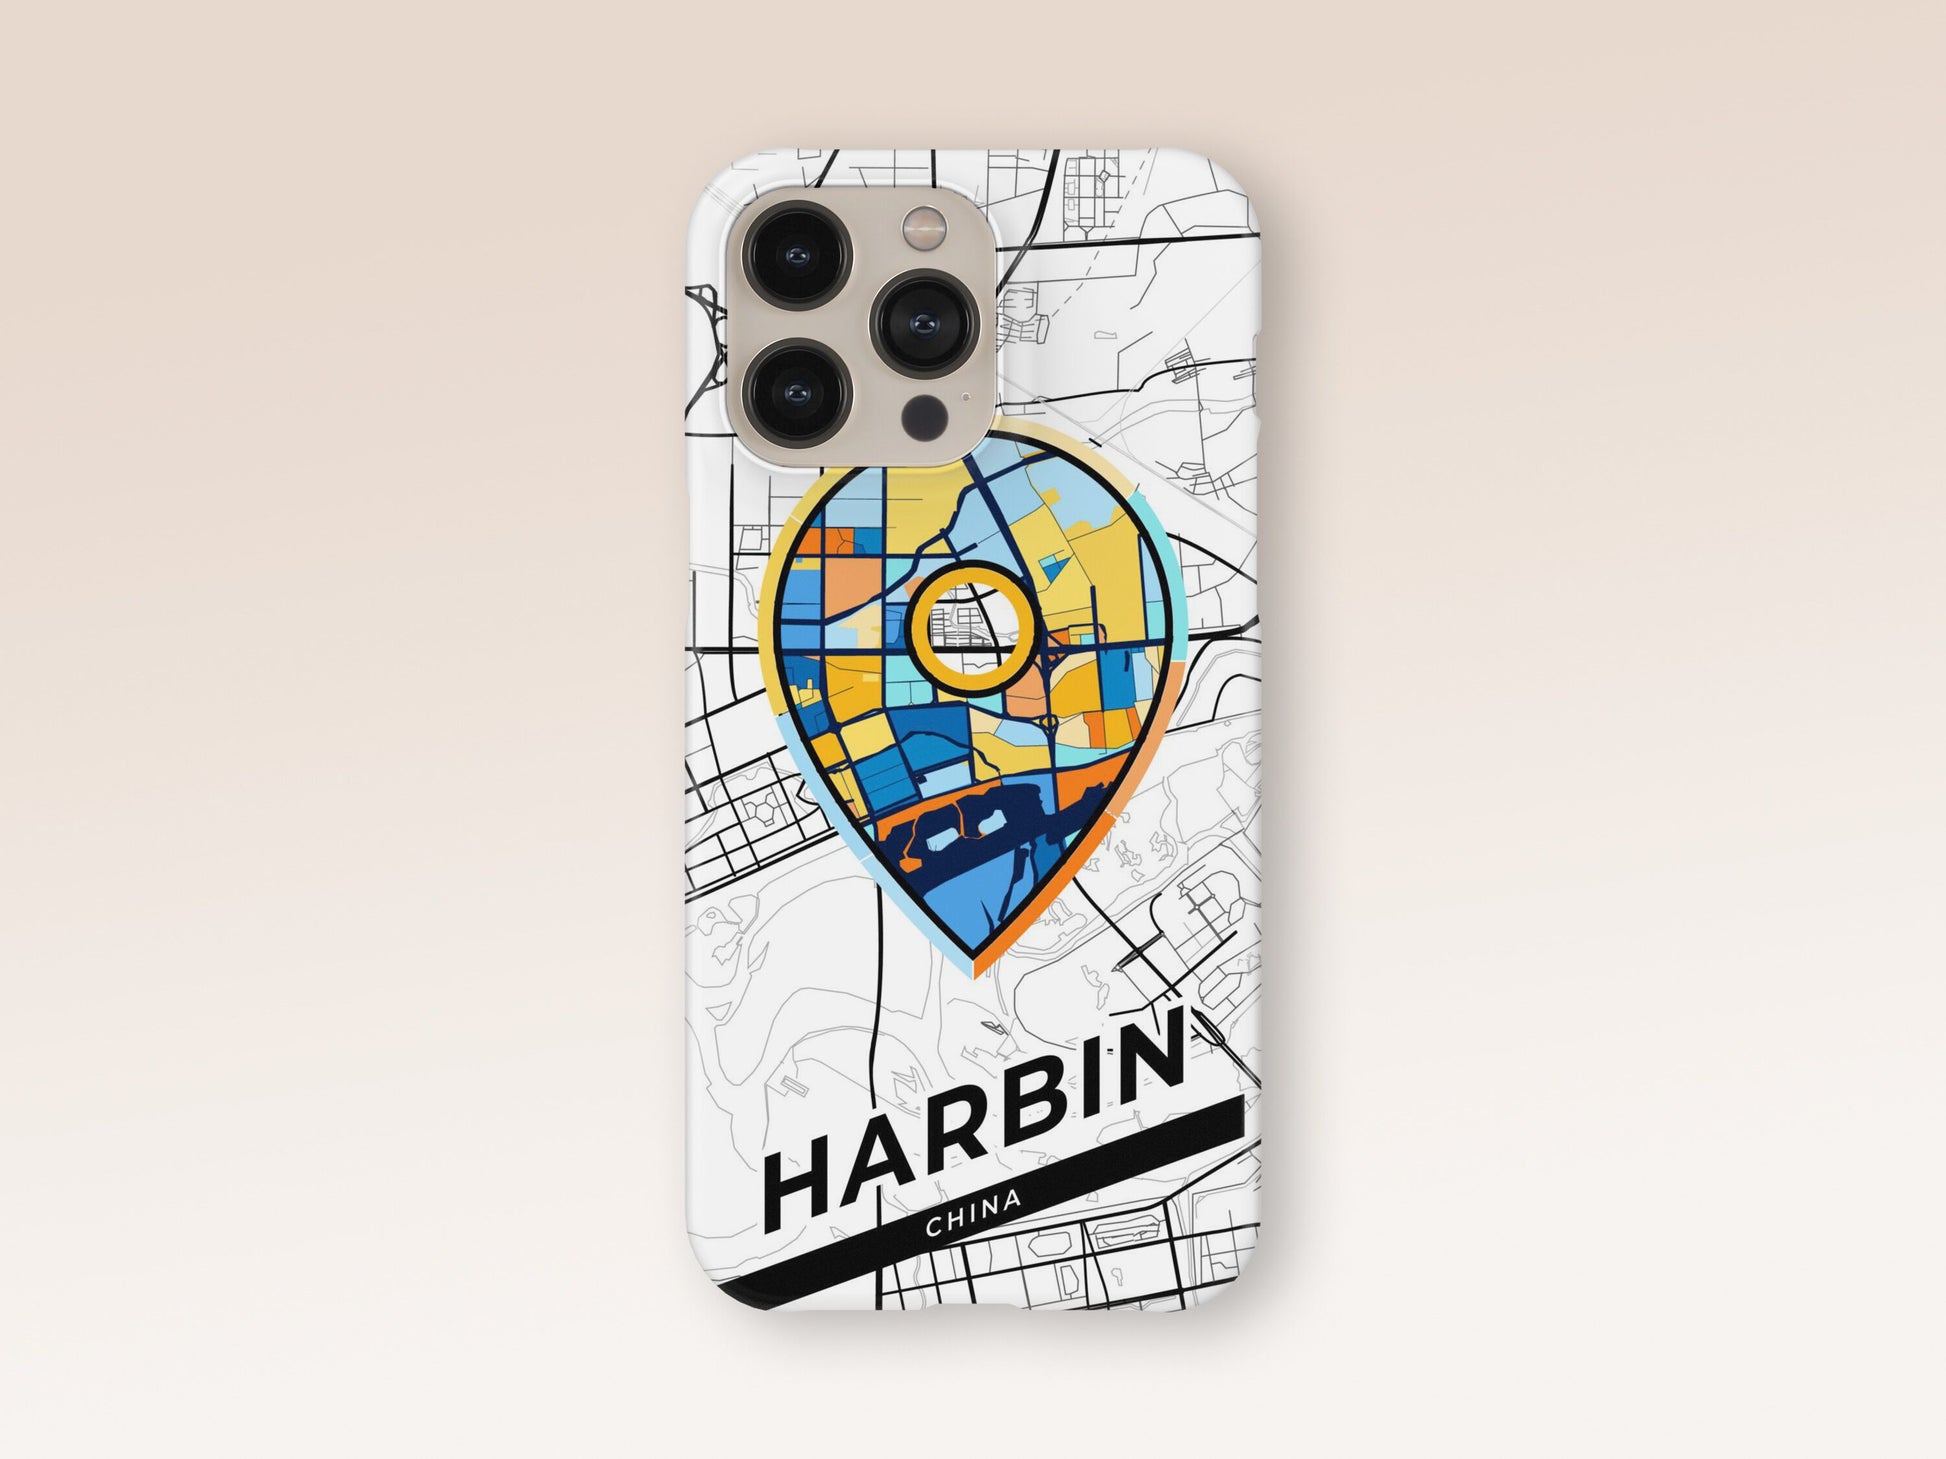 Harbin China slim phone case with colorful icon. Birthday, wedding or housewarming gift. Couple match cases. 1